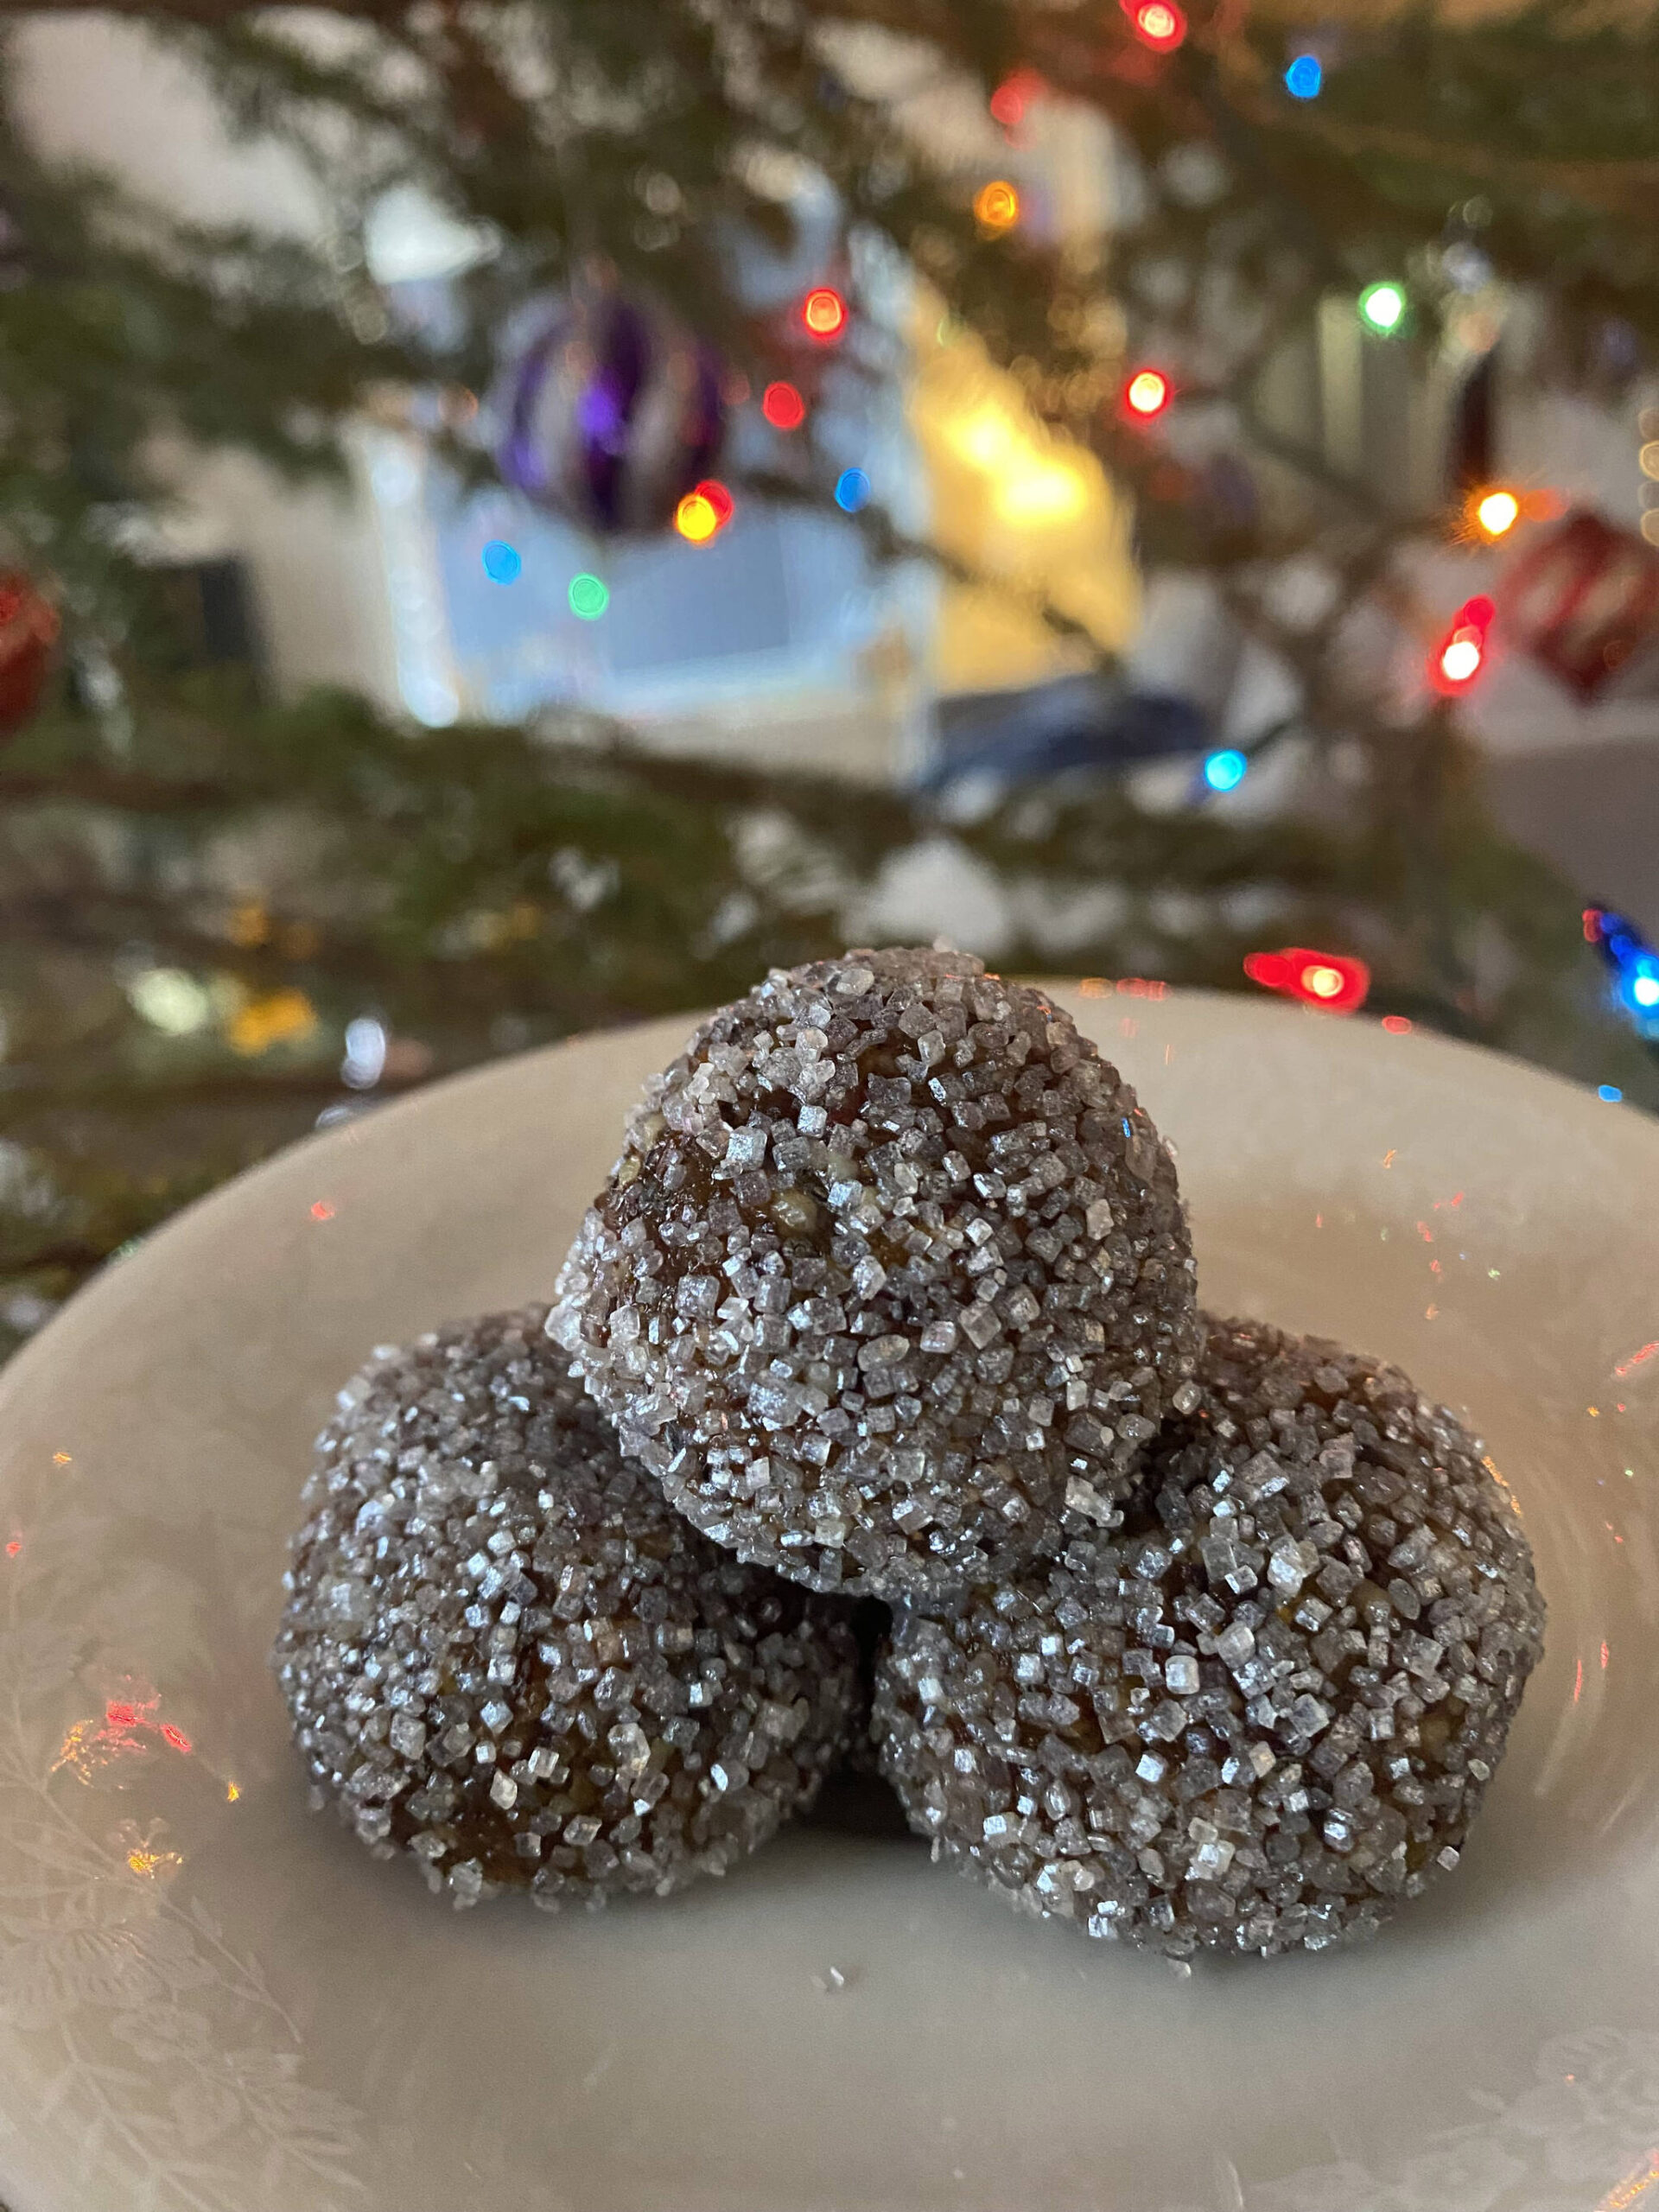 Sugarplums are made of toasted nuts and dried fruit with spices and honey, rolled in sparkling sugar. (Photo by Tressa Dale/Peninsula Clarion)